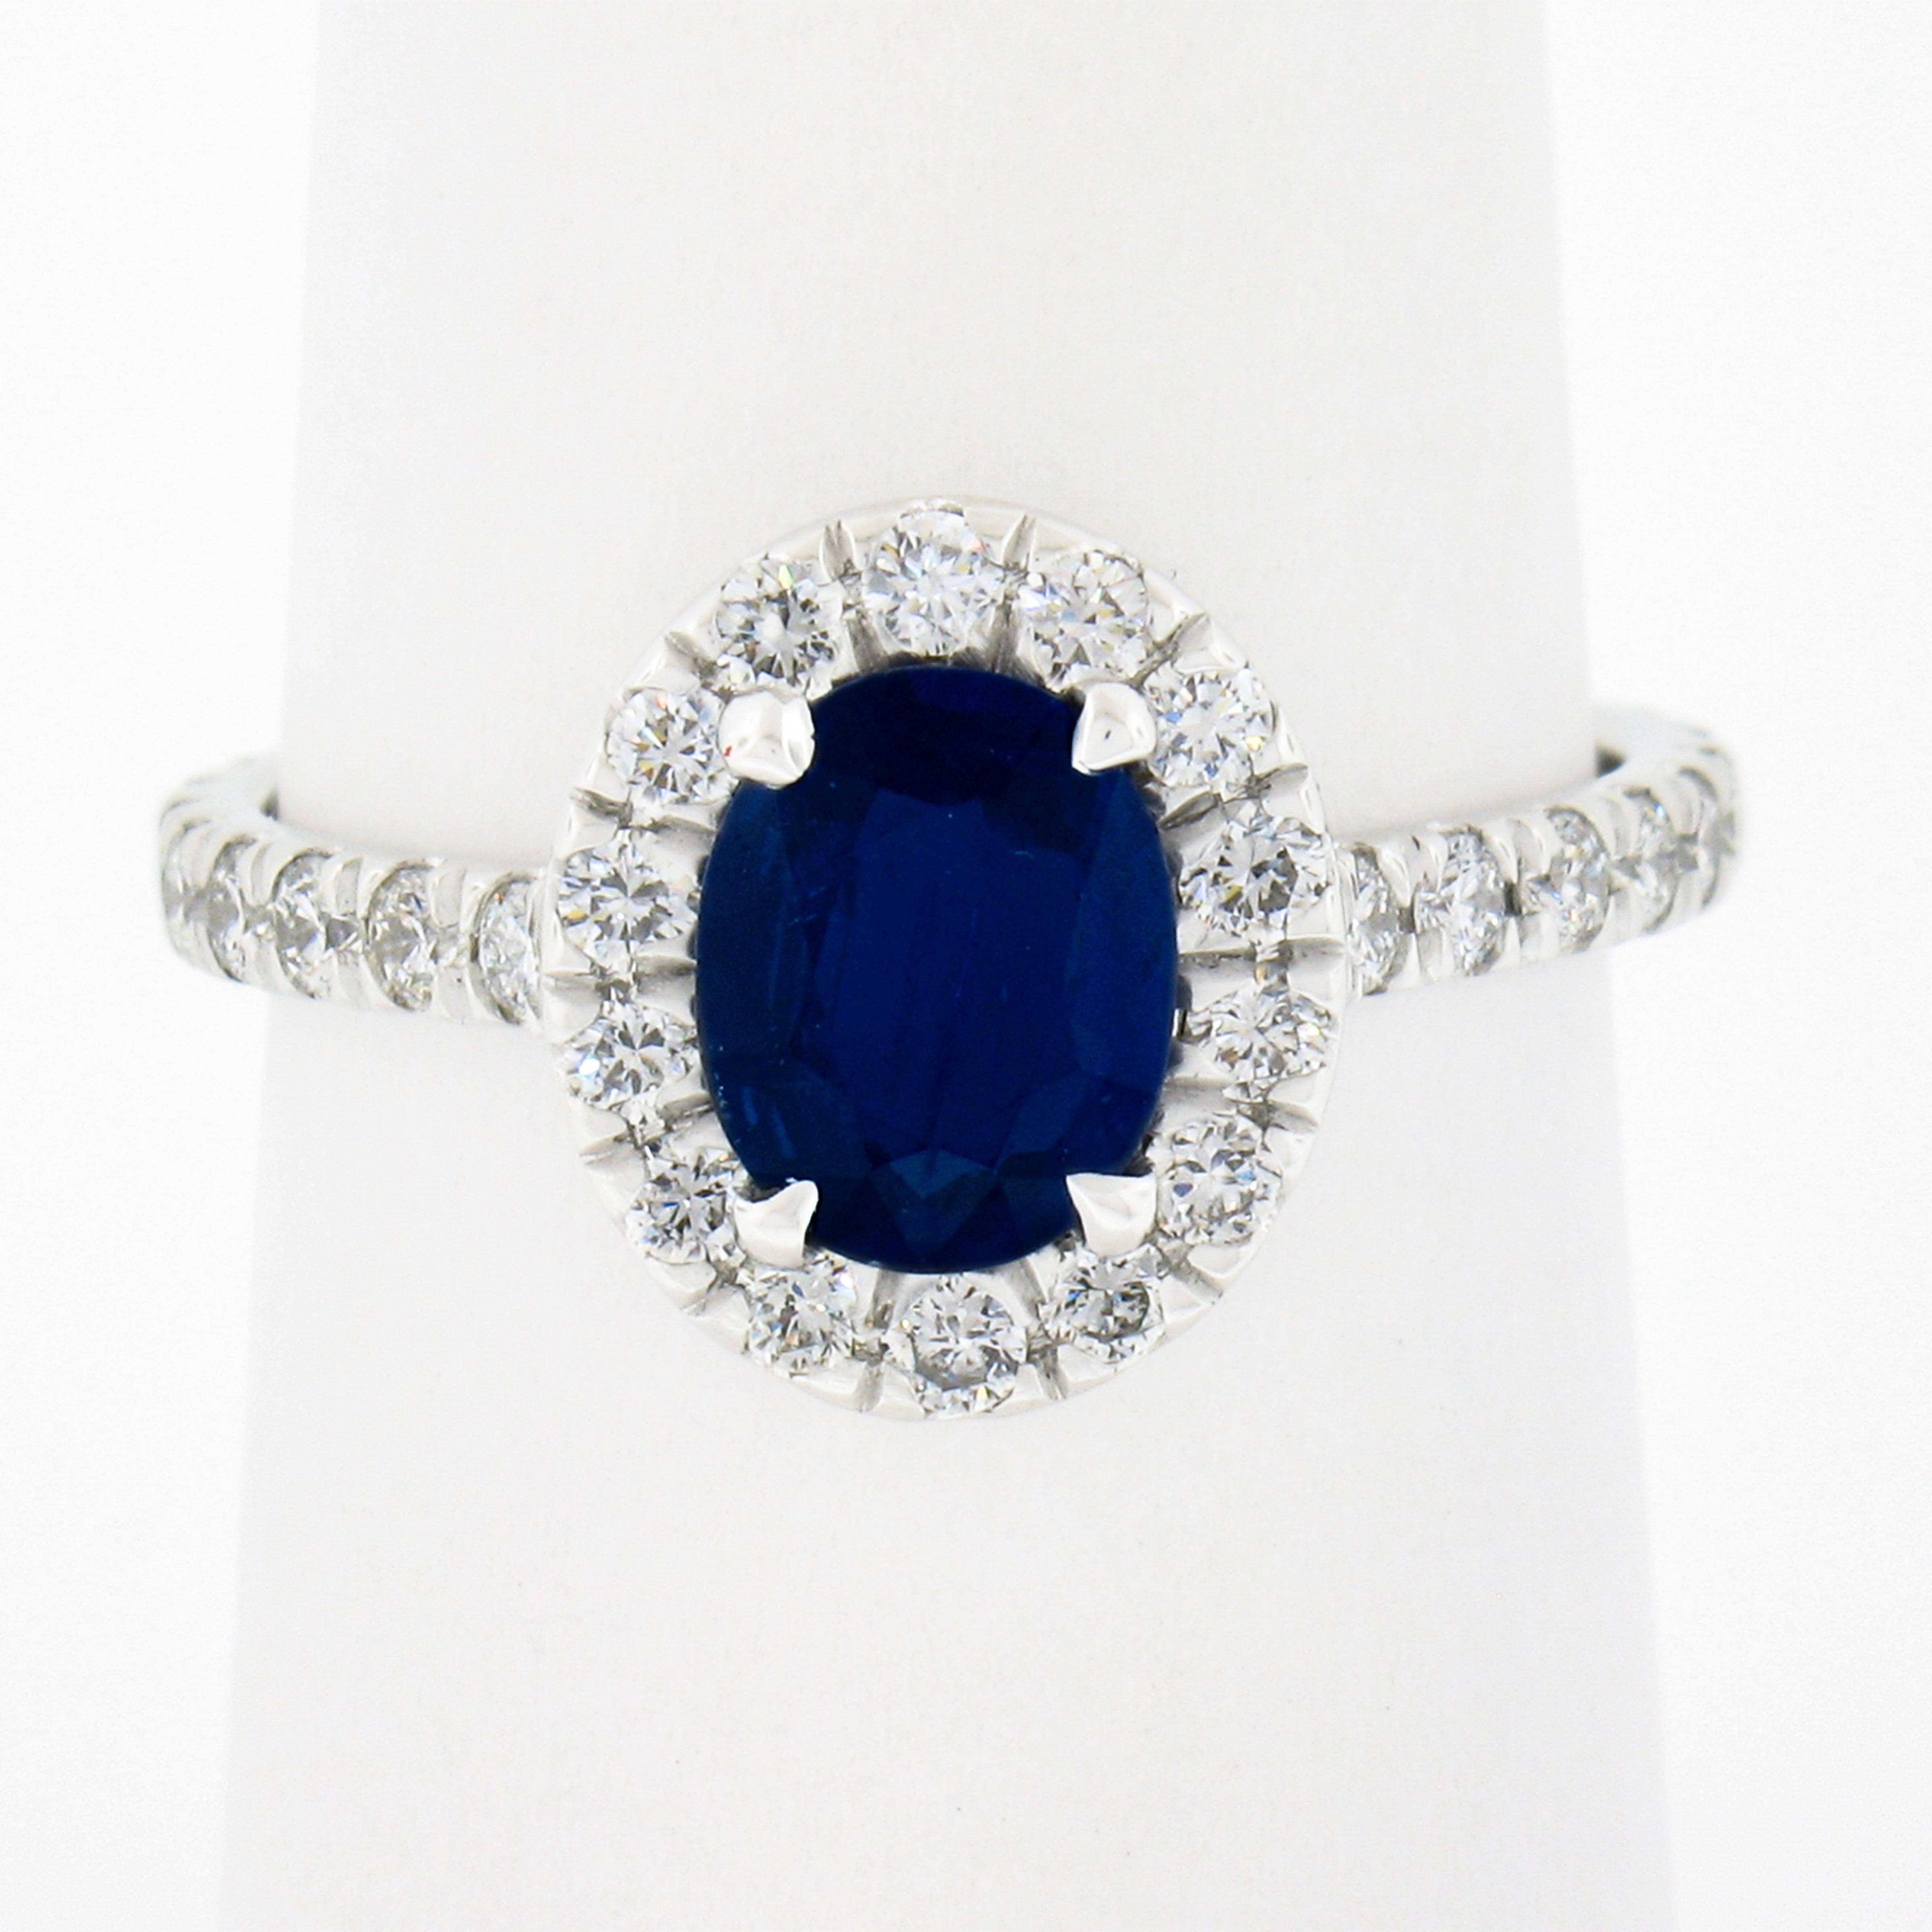 This chic and well made sapphire and diamond engagement ring is newly crafted in solid platinum. It features a vivid oval blue sapphire that is elegantly claw-prong set at the center of a diamond halo design. The fine quality solitaire weighs 1.10